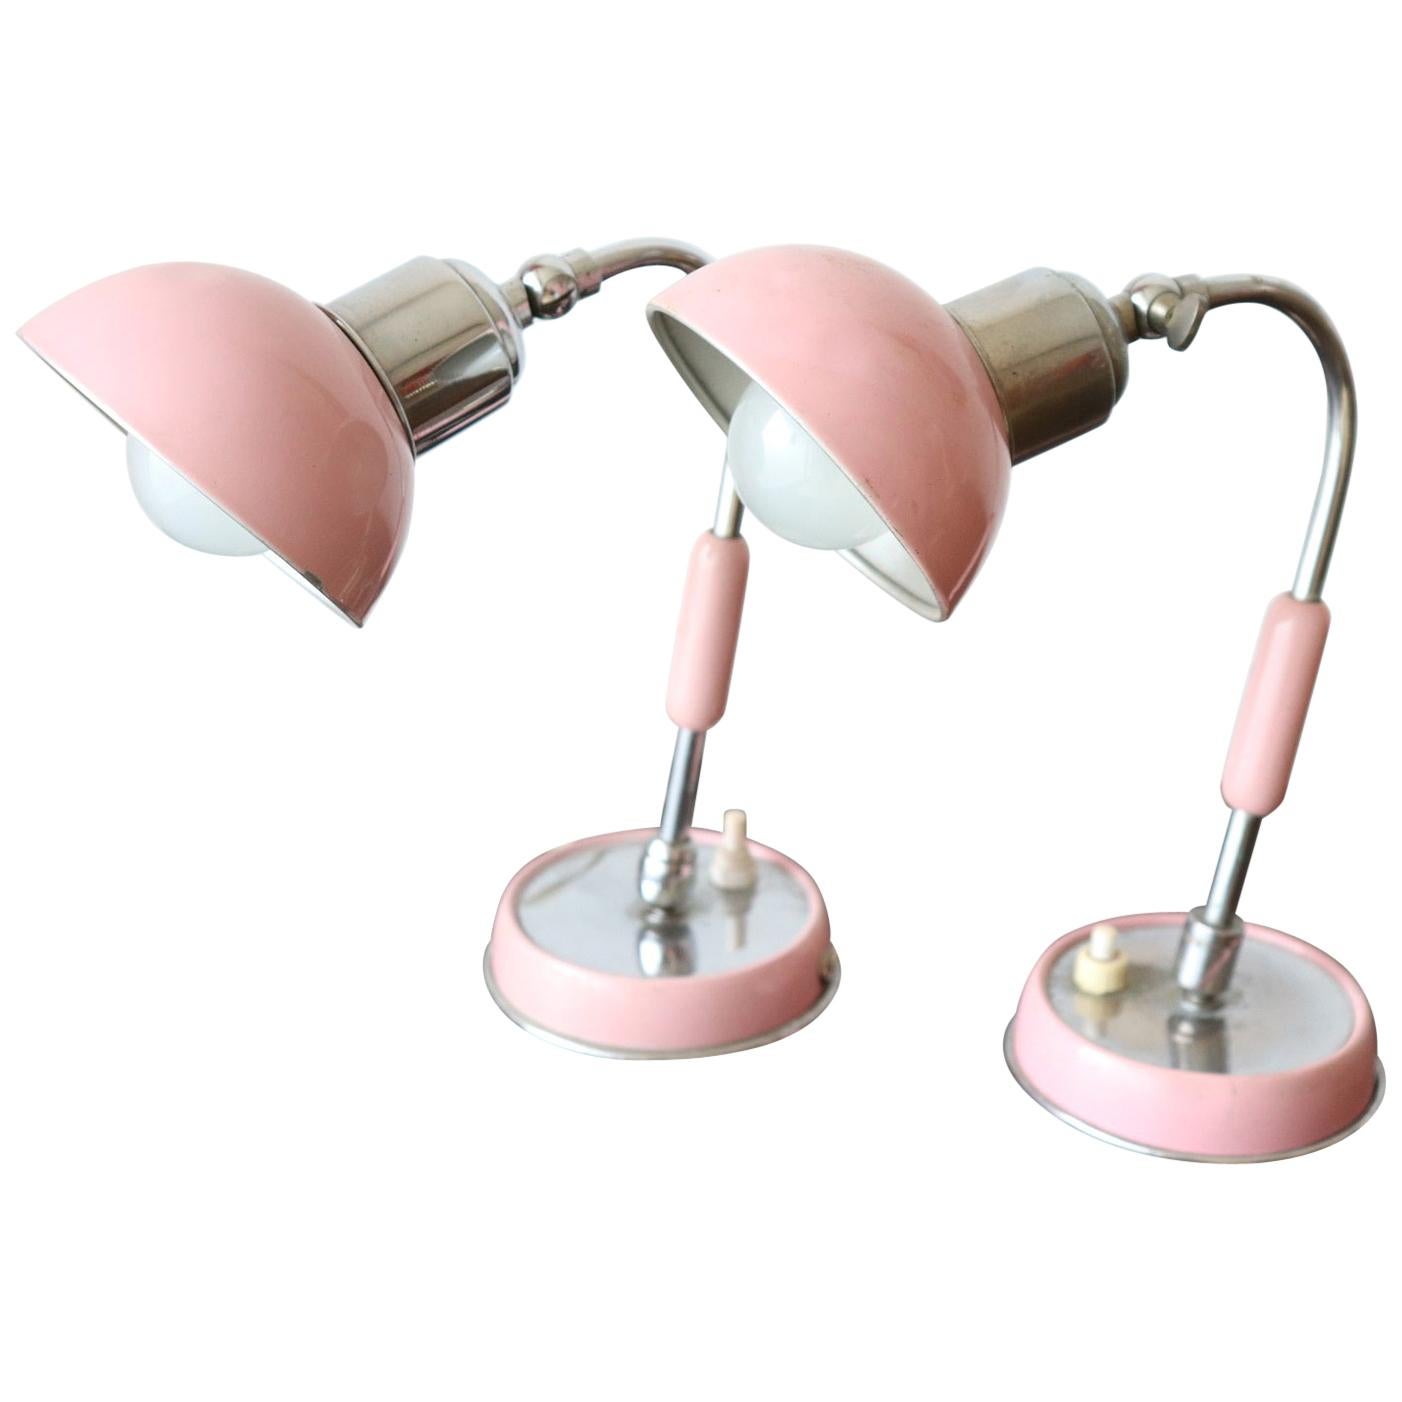 20th Century Italian Design Chrome and Pink Color Pair of Table Lamp, 1960s